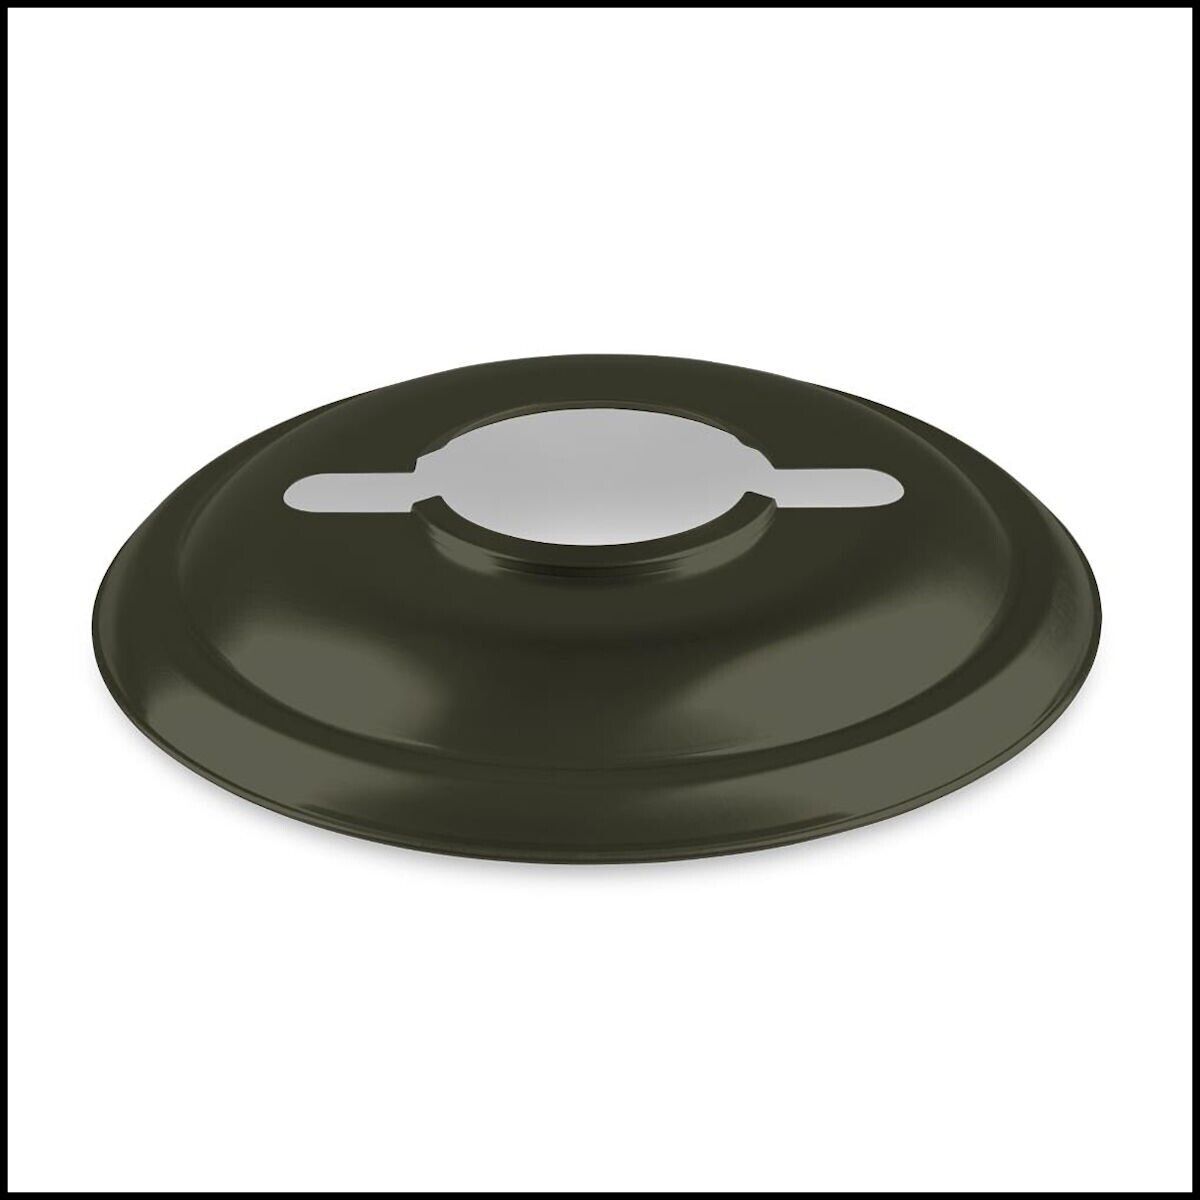 FEUERHAND LANTERN TOP REFLECTOR IN OLIVE GREEN for use with #276 LANTERNS